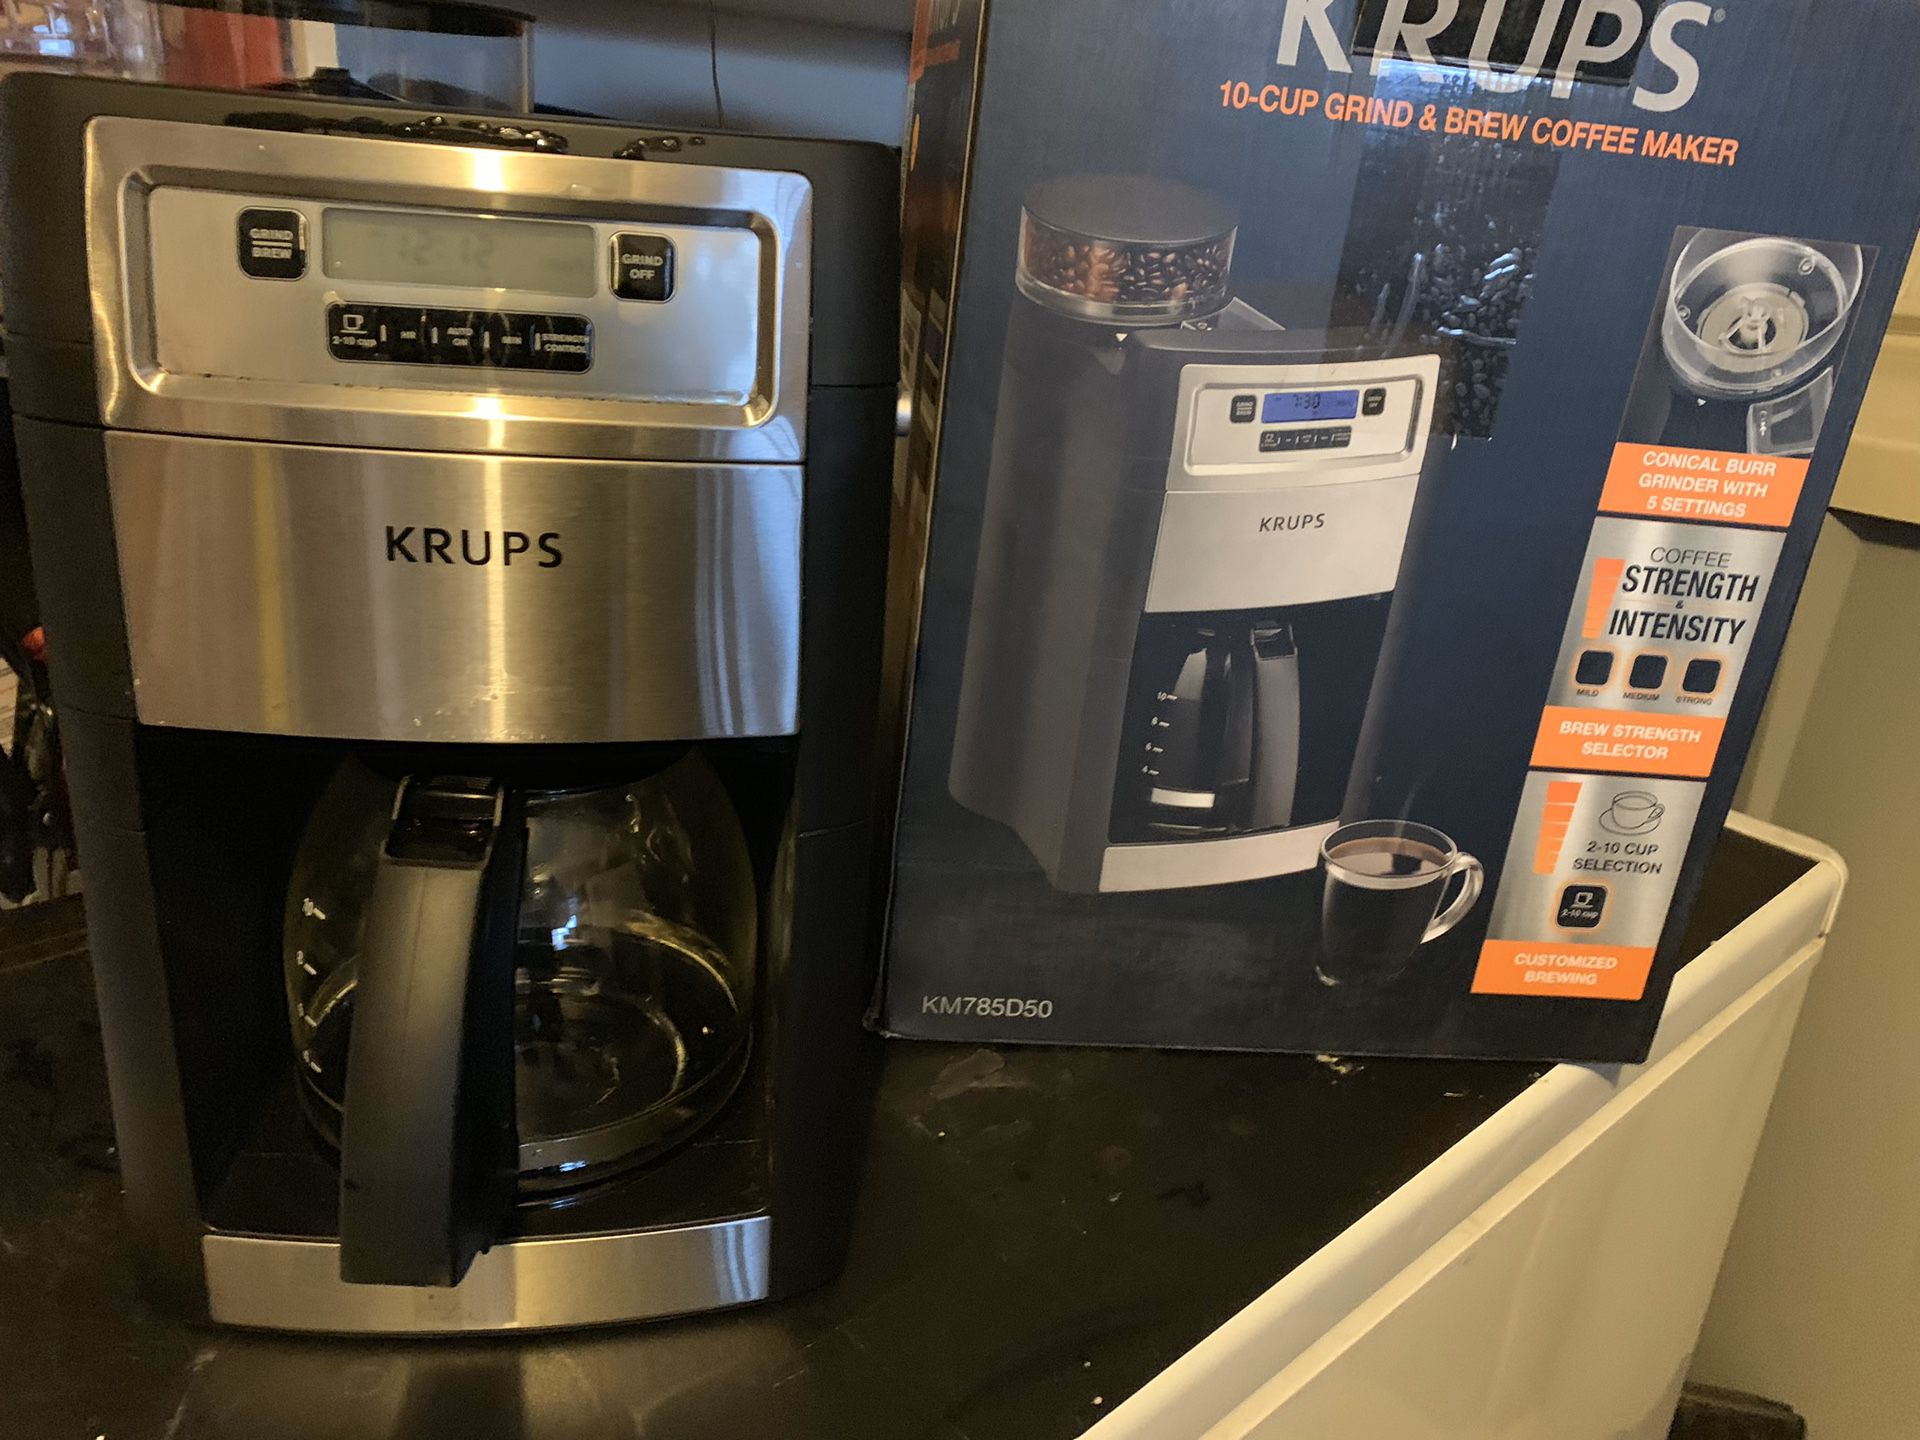 Kurps grind & brew coffee maker / coffee machine and coffee grinder / like new excellent condition never used in original box